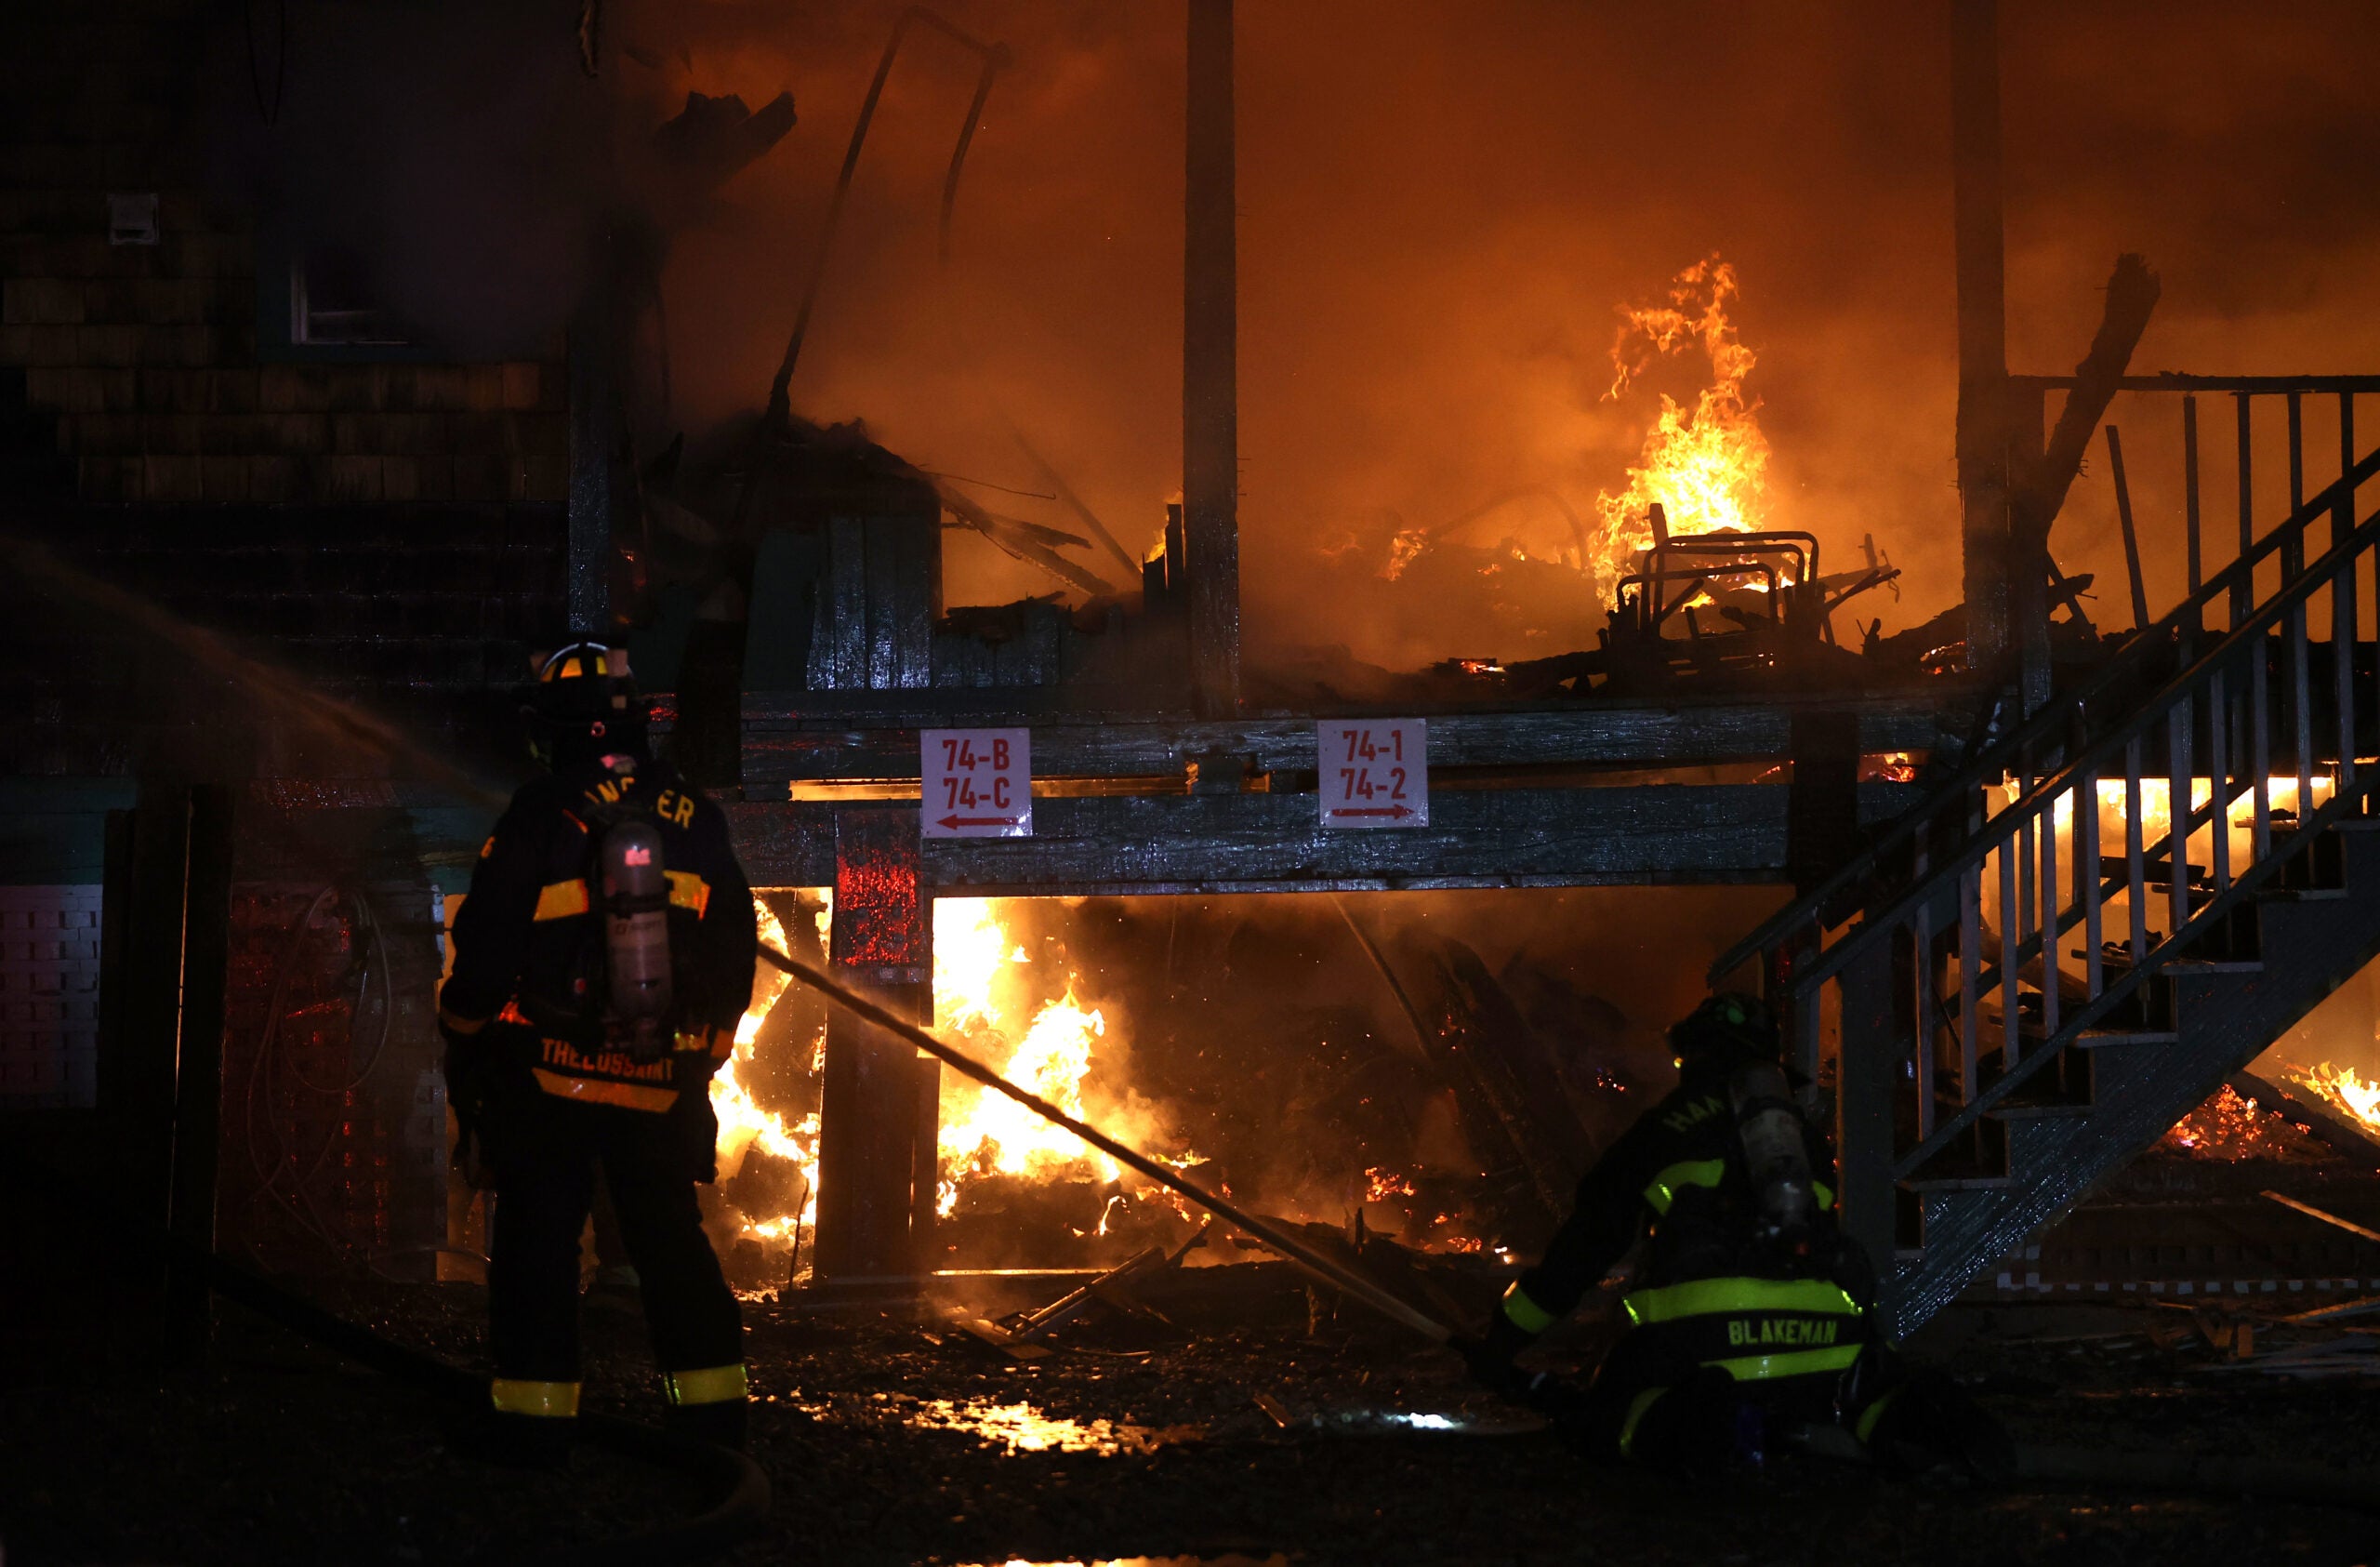 A firefighter in gear looks on as flames continue to burn among the remains of several waterfront homes. Though it is nighttime, the flames illuminate the scene in a dim orange light.